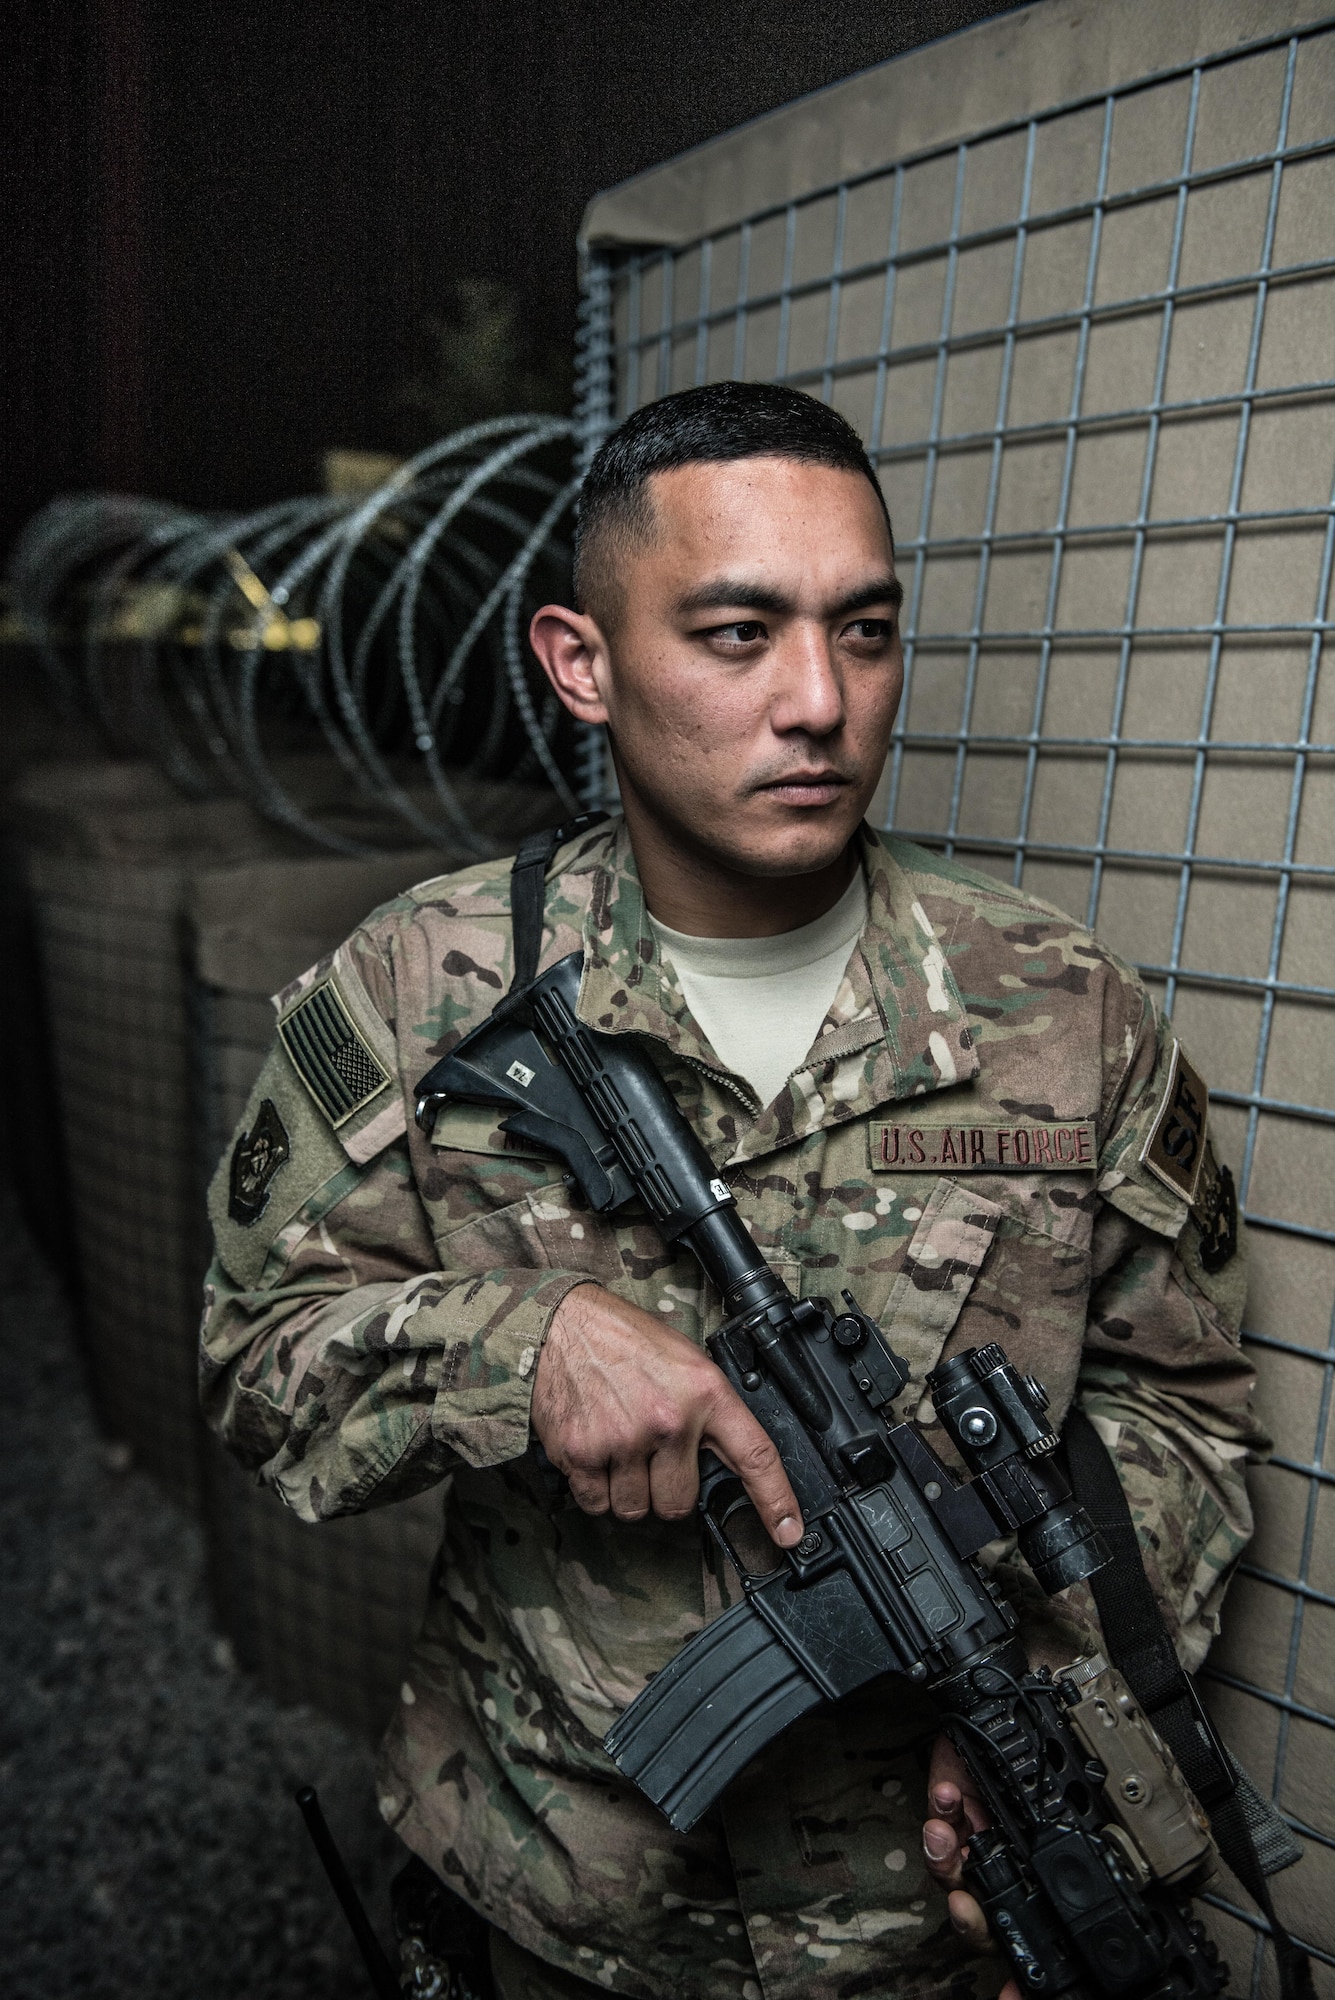 U.S. Air National Guard Staff Sgt. Ricky Meno, a vehicle search area lead with the 407th Expeditionary Security Forces Squadron, stands with his M4 carbine for a photo May 10, 2017, at the 407th Air Expeditionary Group. Meno's team ensures only authorized personnel and vehicles enter the installation by providing vehicles search and additional overwatch via towers, cameras and other sensors covering the area. Meno, a traditional guardsman with the 254th Security Forces Squadron at Andersen Air Force Base, Guam, deployed in support of Operation Inherent Resolve. (U.S. Air Force photo by Staff Sgt. Alexander W. Riedel)